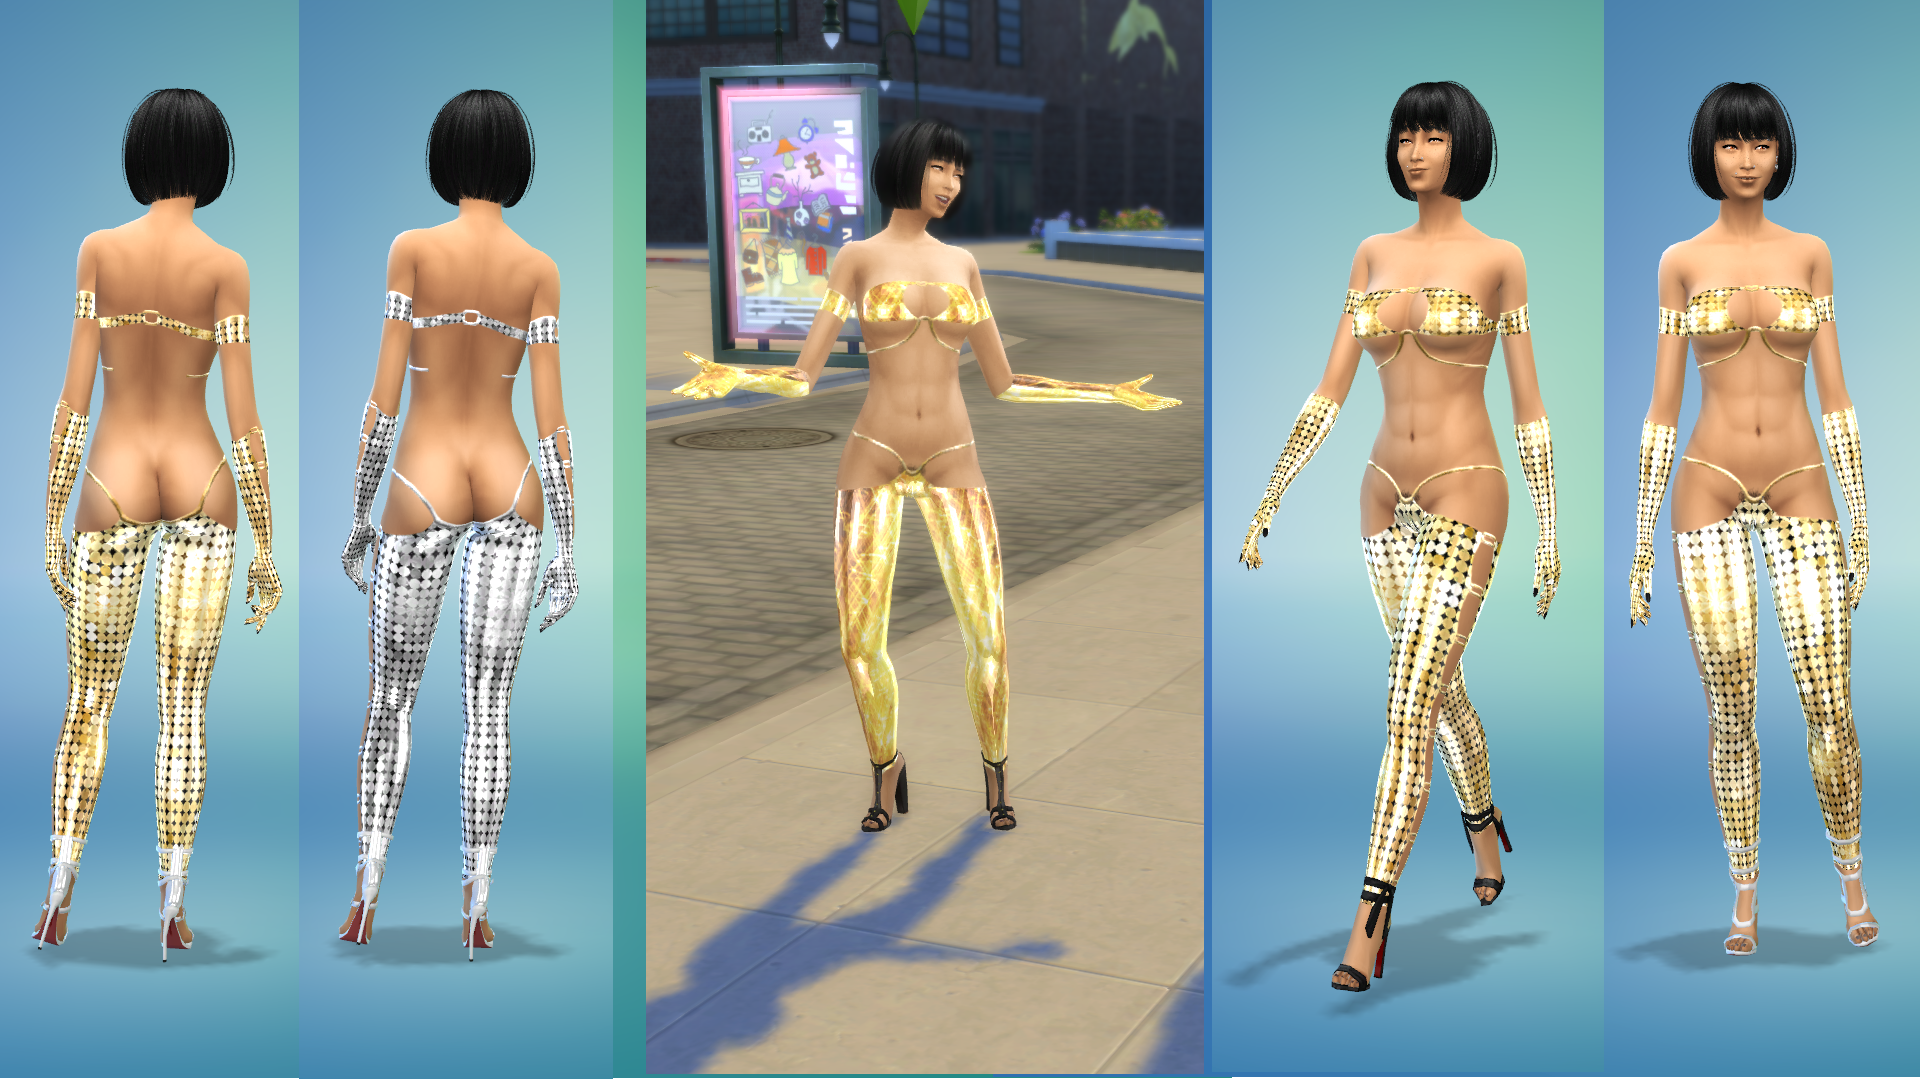 Looking For Clothes Request And Find The Sims 4 Loverslab